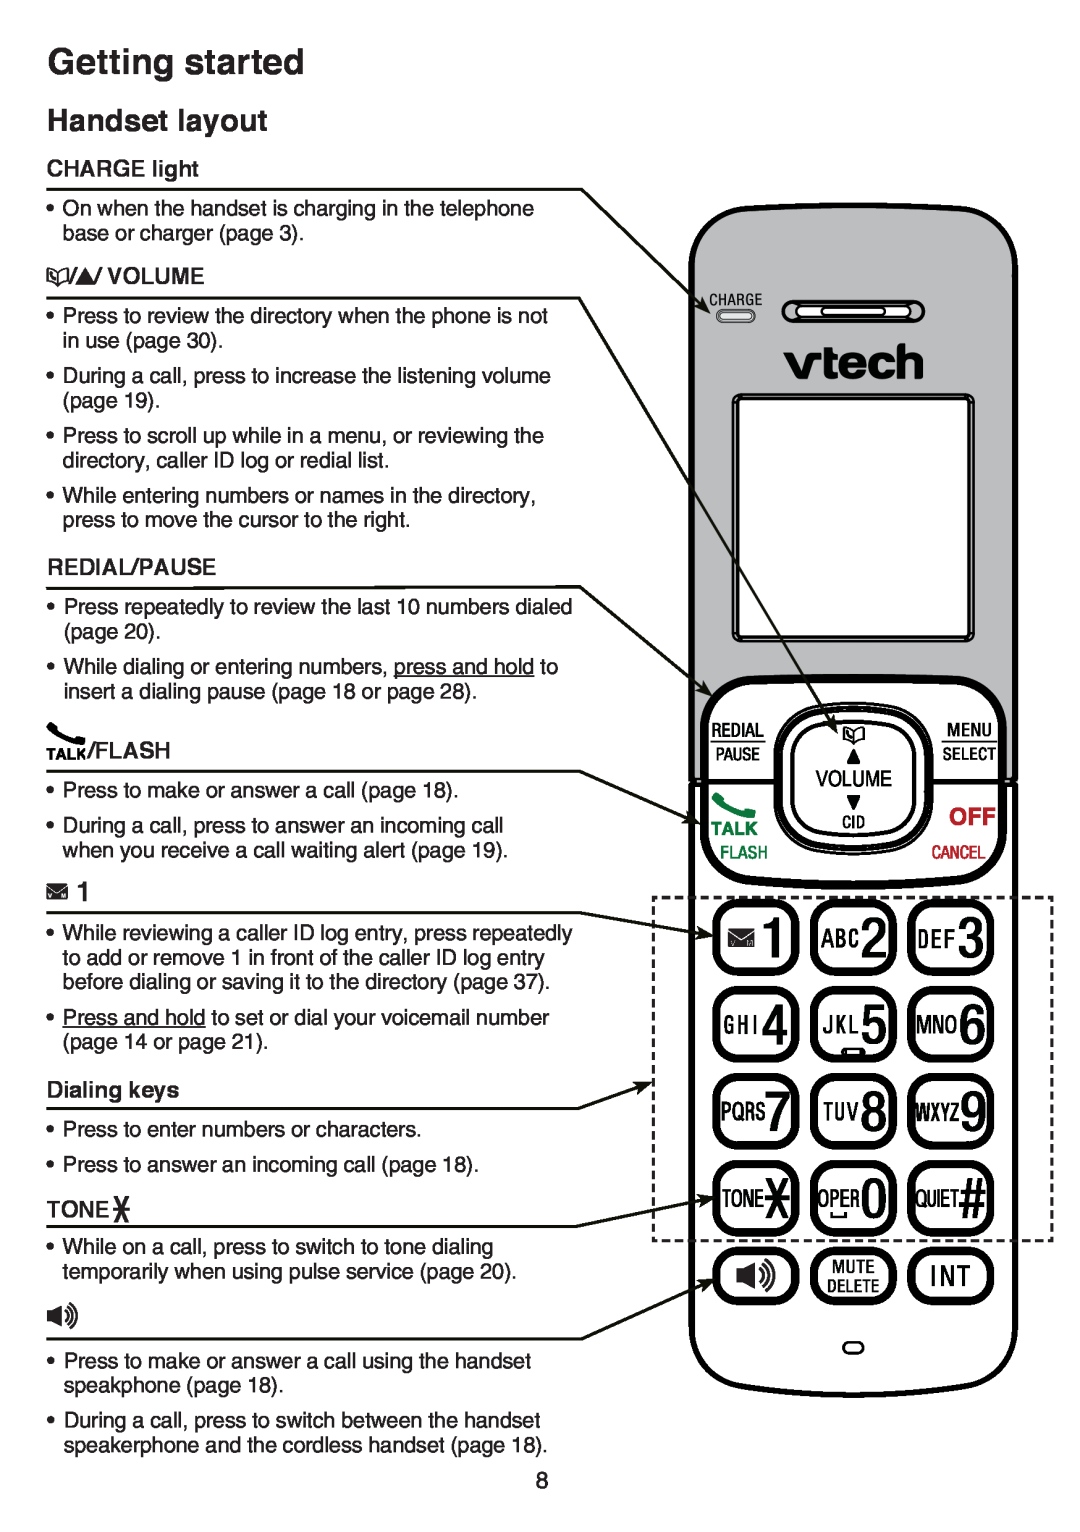 VTech CS6519-15, CS6519-2 Handset layout, Getting started, CHARGE light, Volume, Redial/Pause, Flash, Dialing keys, Tone 